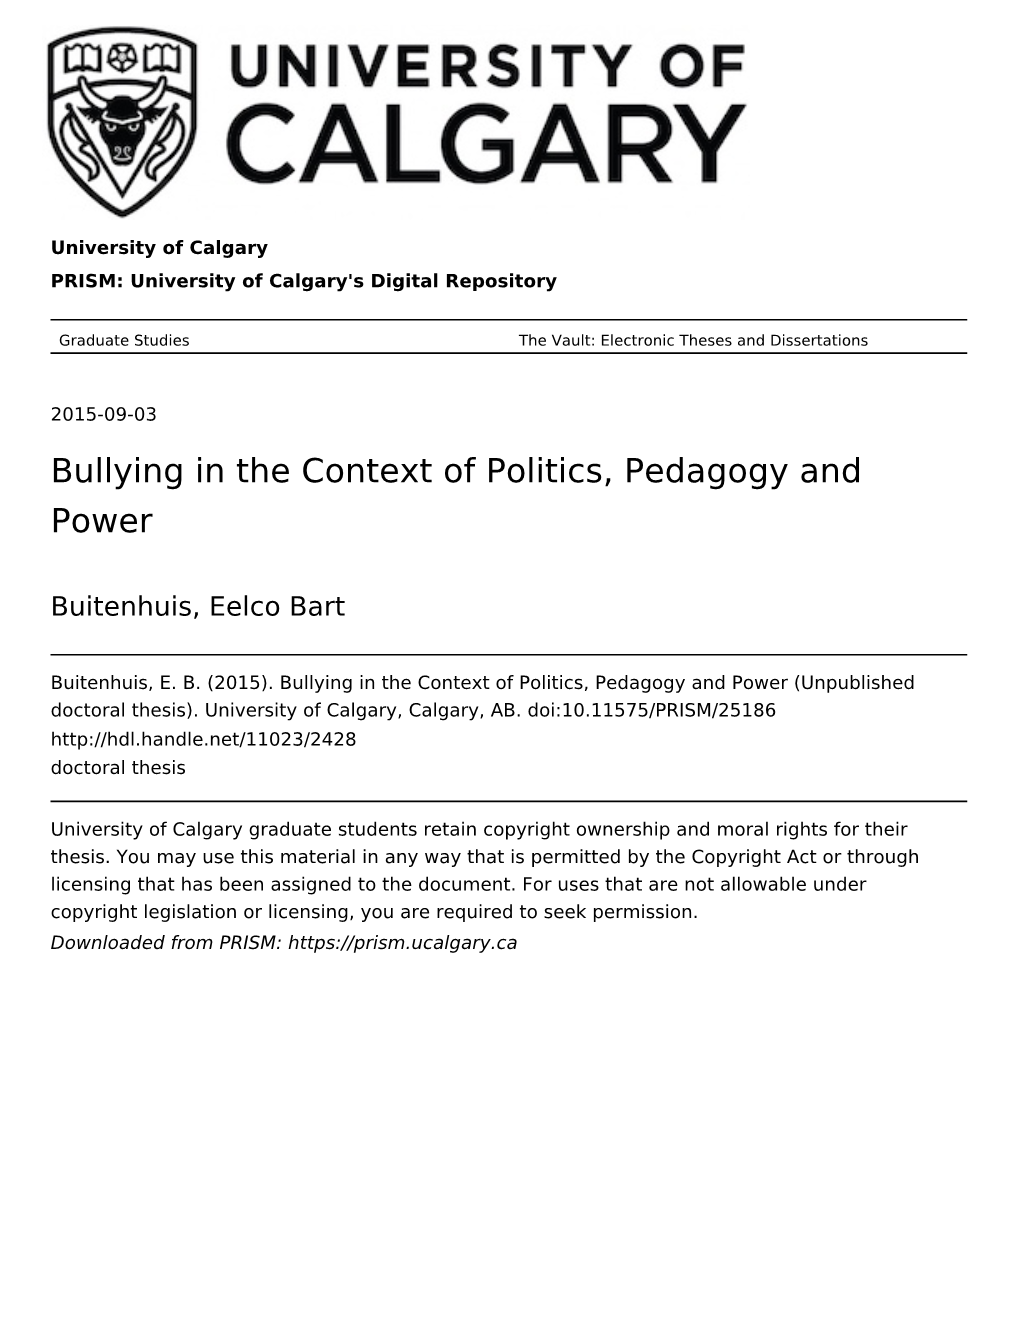 Bullying in the Context of Politics, Pedagogy and Power